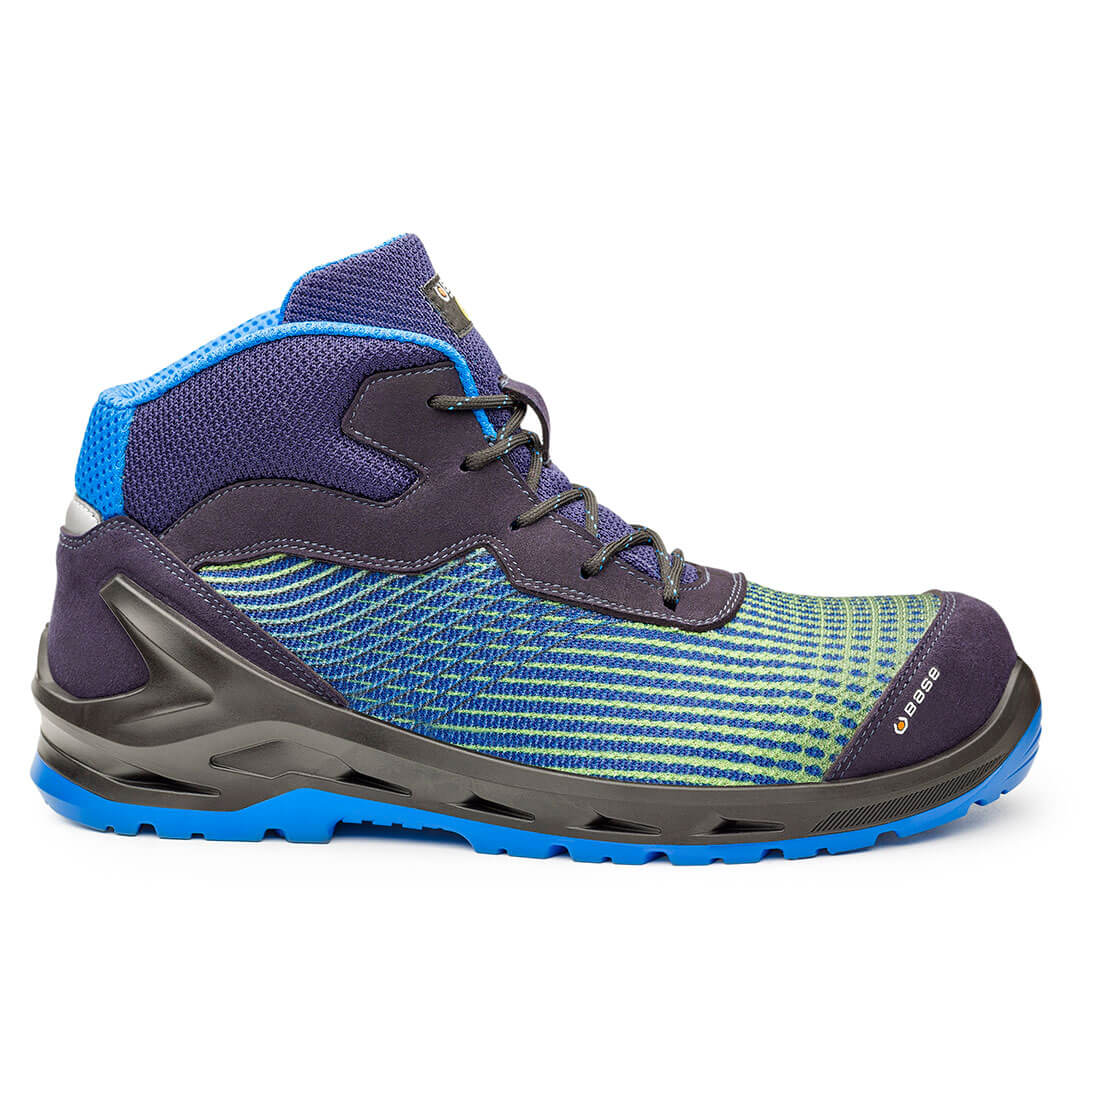 Base Protection i-Cyber Fluo Top Safety Boots